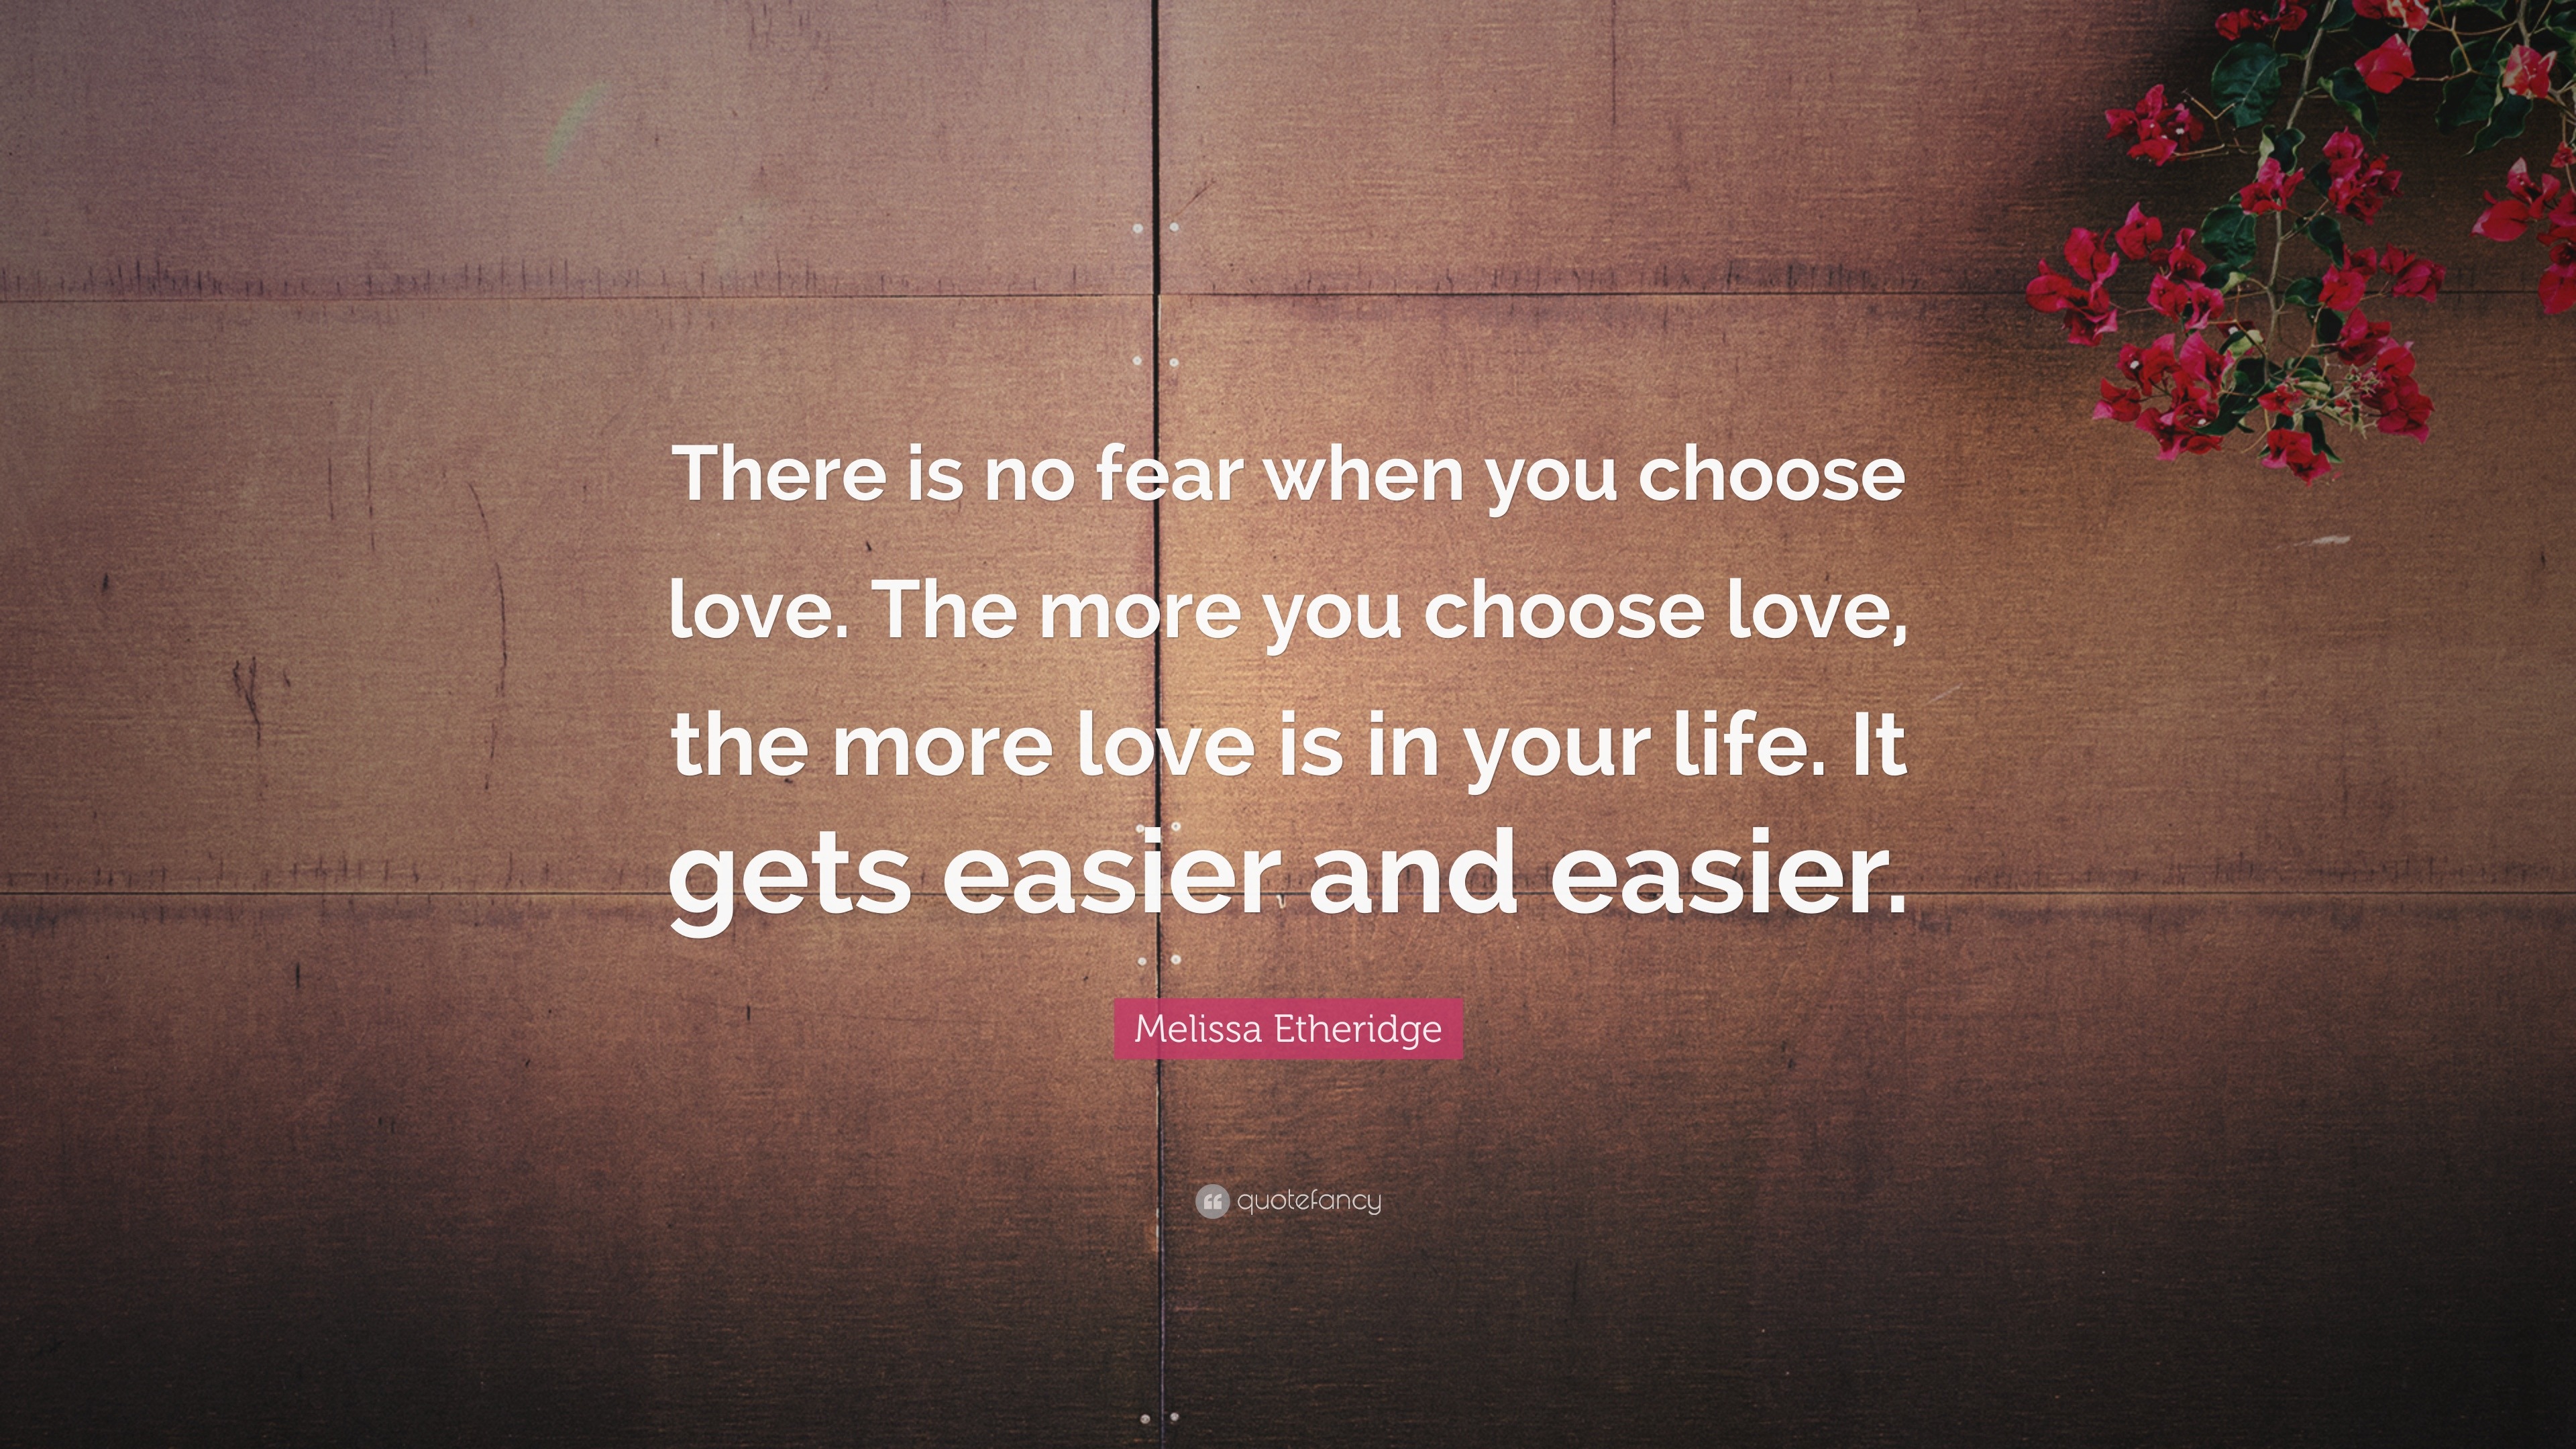 Melissa Etheridge Quote: “There is no fear when you choose love. The ...